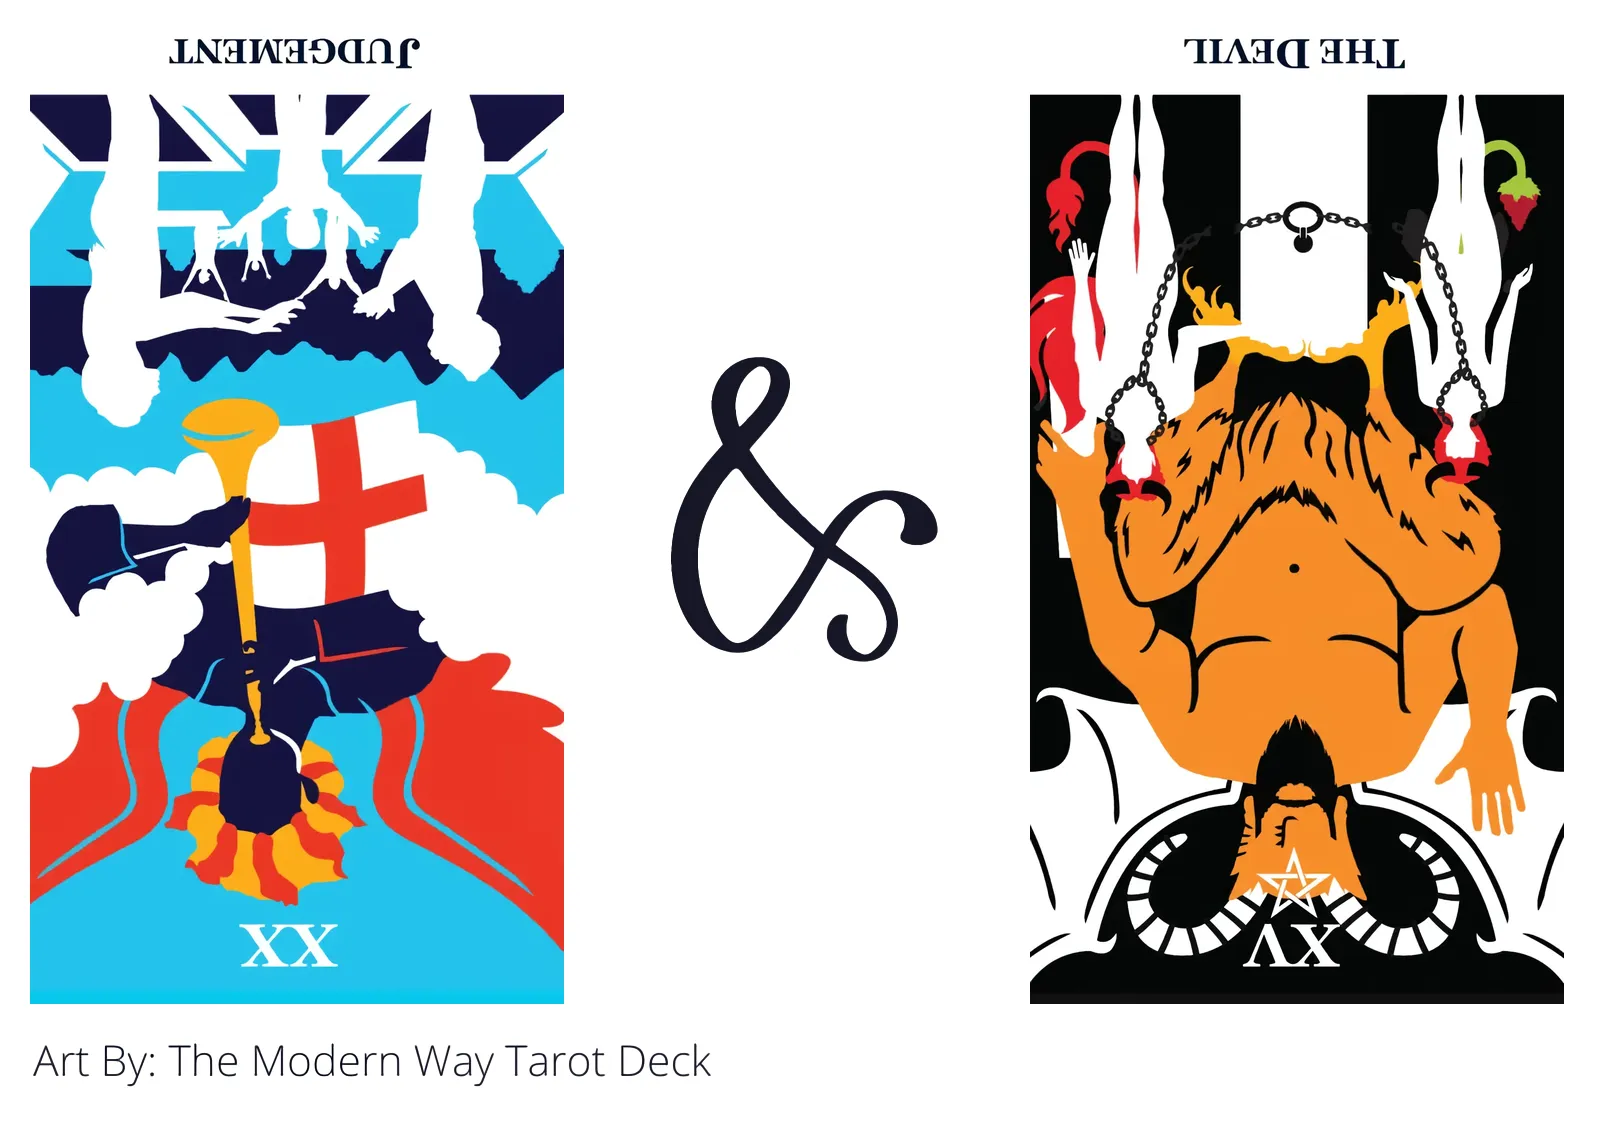 judgement reversed and the devil reversed tarot cards together